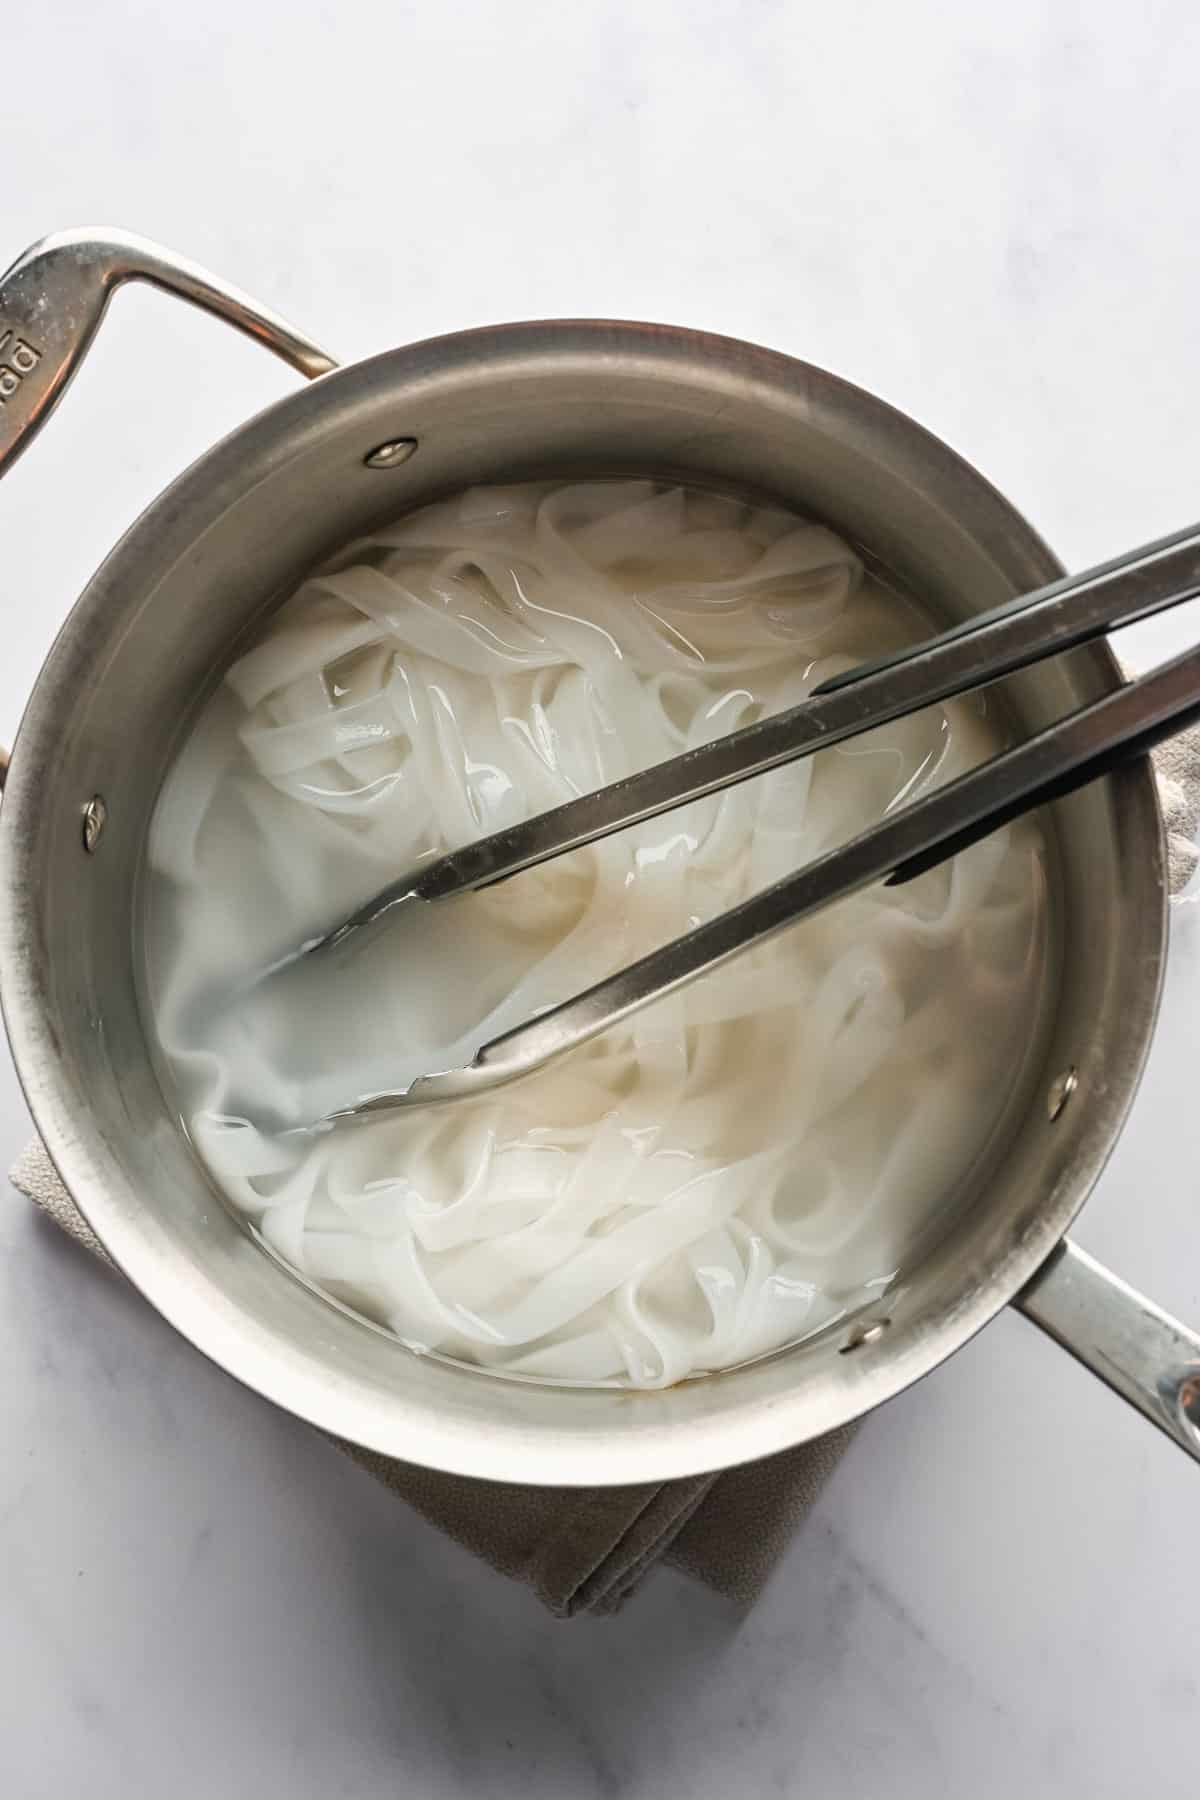 A pair of tongs resting in a pot of cooked rice noodles.